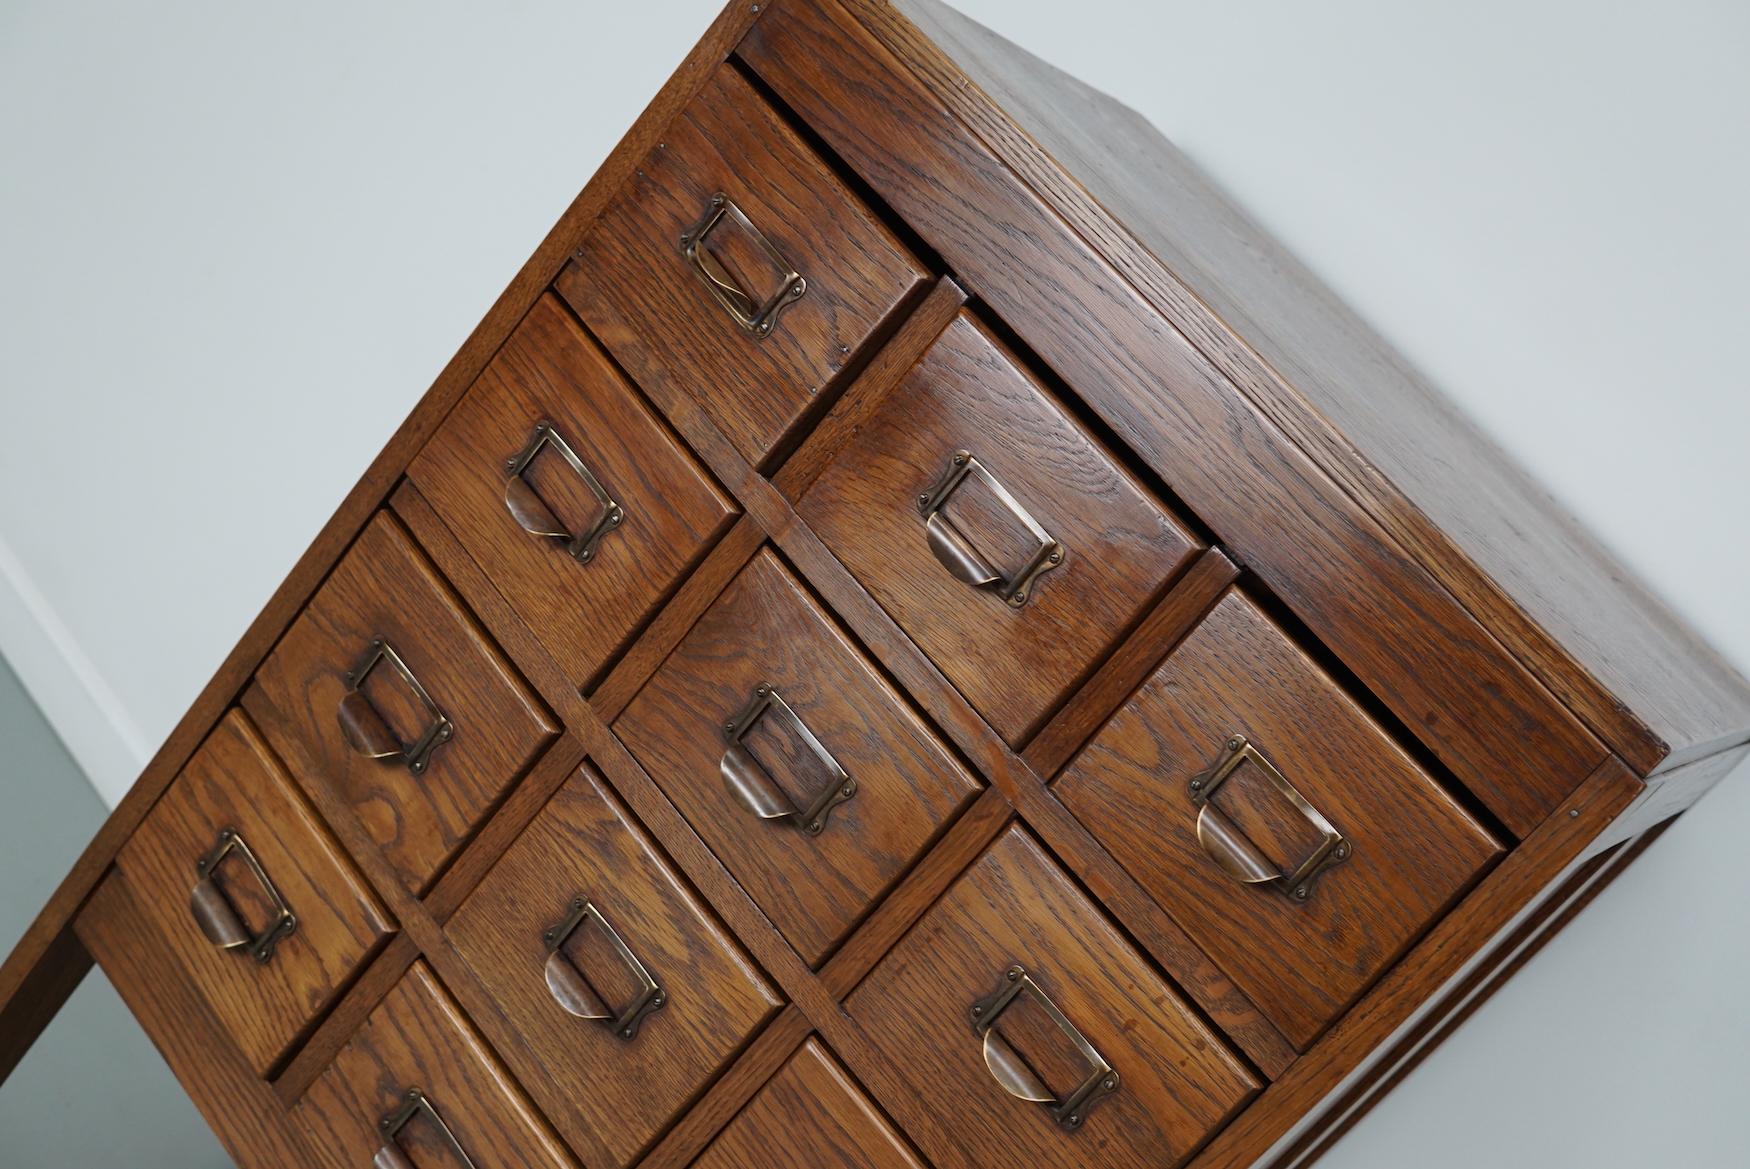 This apothecary / filing cabinet was produced during the 1930s in the Netherlands. This piece features 12 drawers on slim legs. The interior dimensions of the drawers are: DWH 47 x 16 x 8.5 / 12.5 cm.